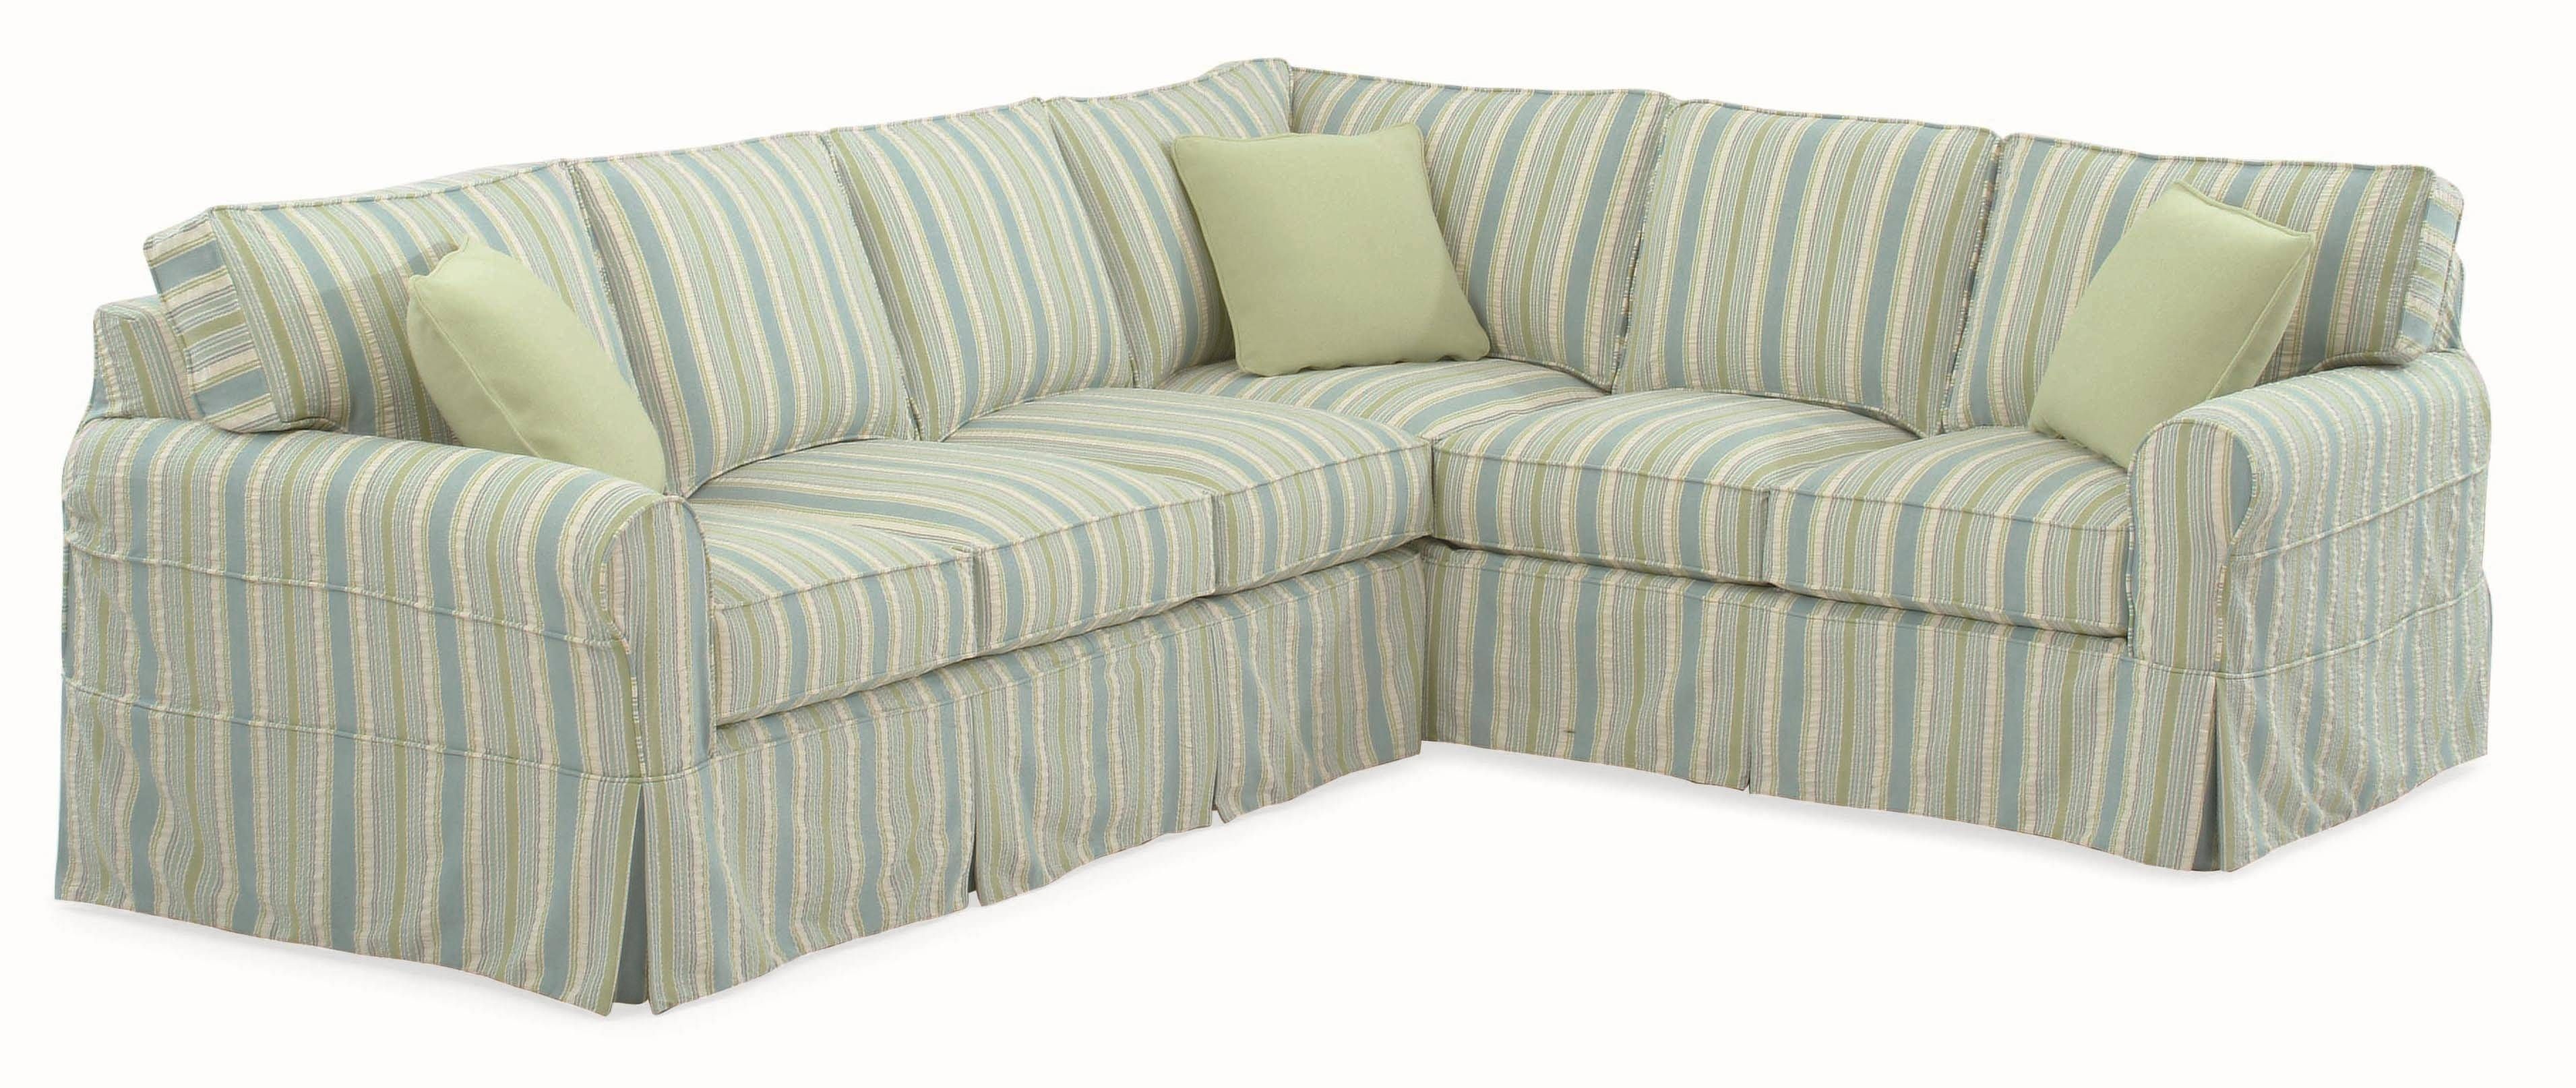 Braxton Culler 728 Casual Sectional Sofa With Rolled Arms And Pertaining To Braxton Sectional Sofas (View 2 of 15)